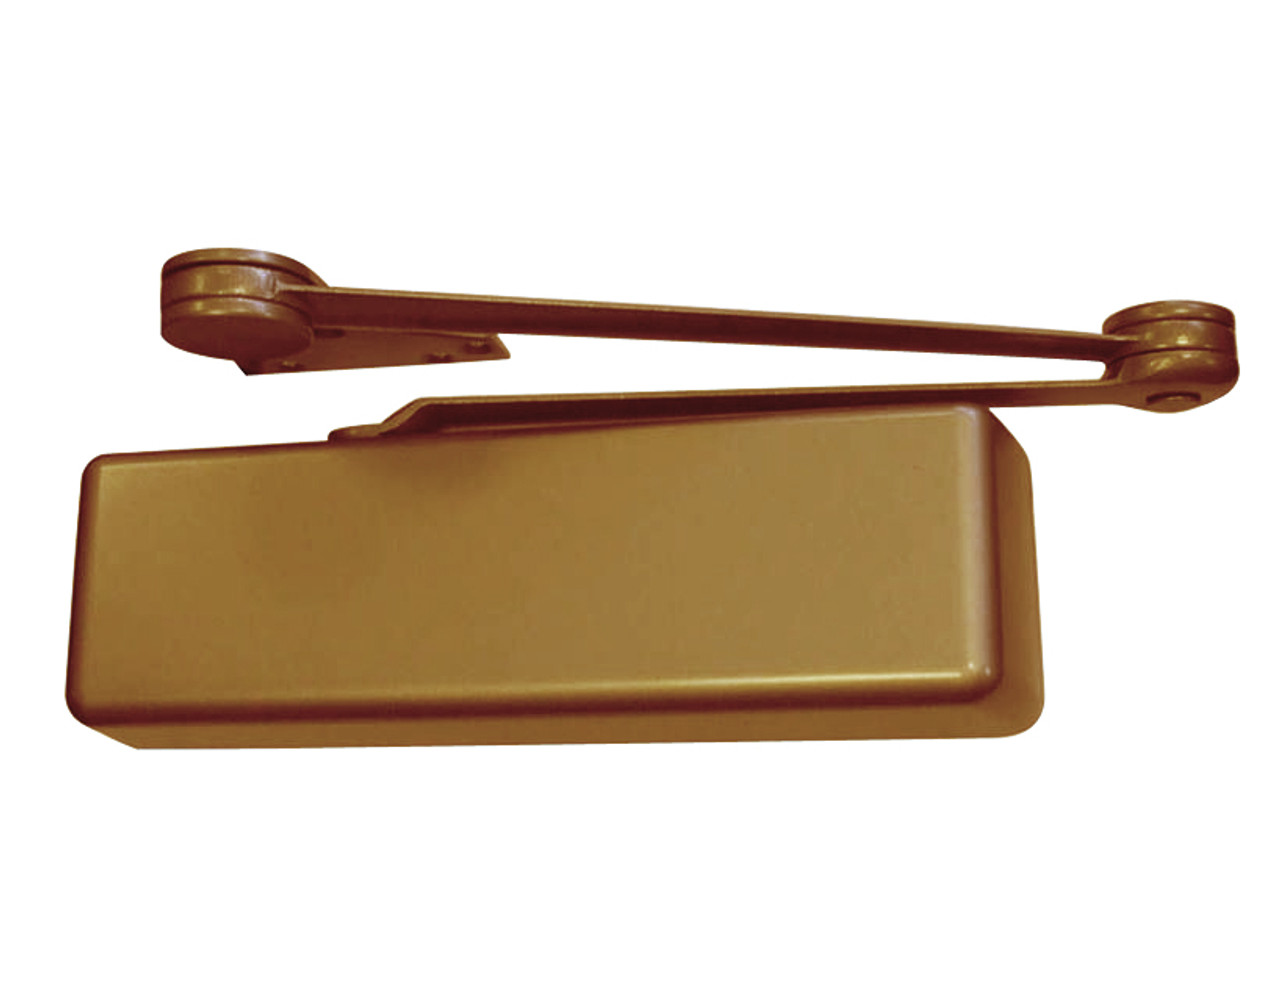 4211-EDA-LH-STAT LCN Door Closer with Extra Duty Arm in Statuary Finish